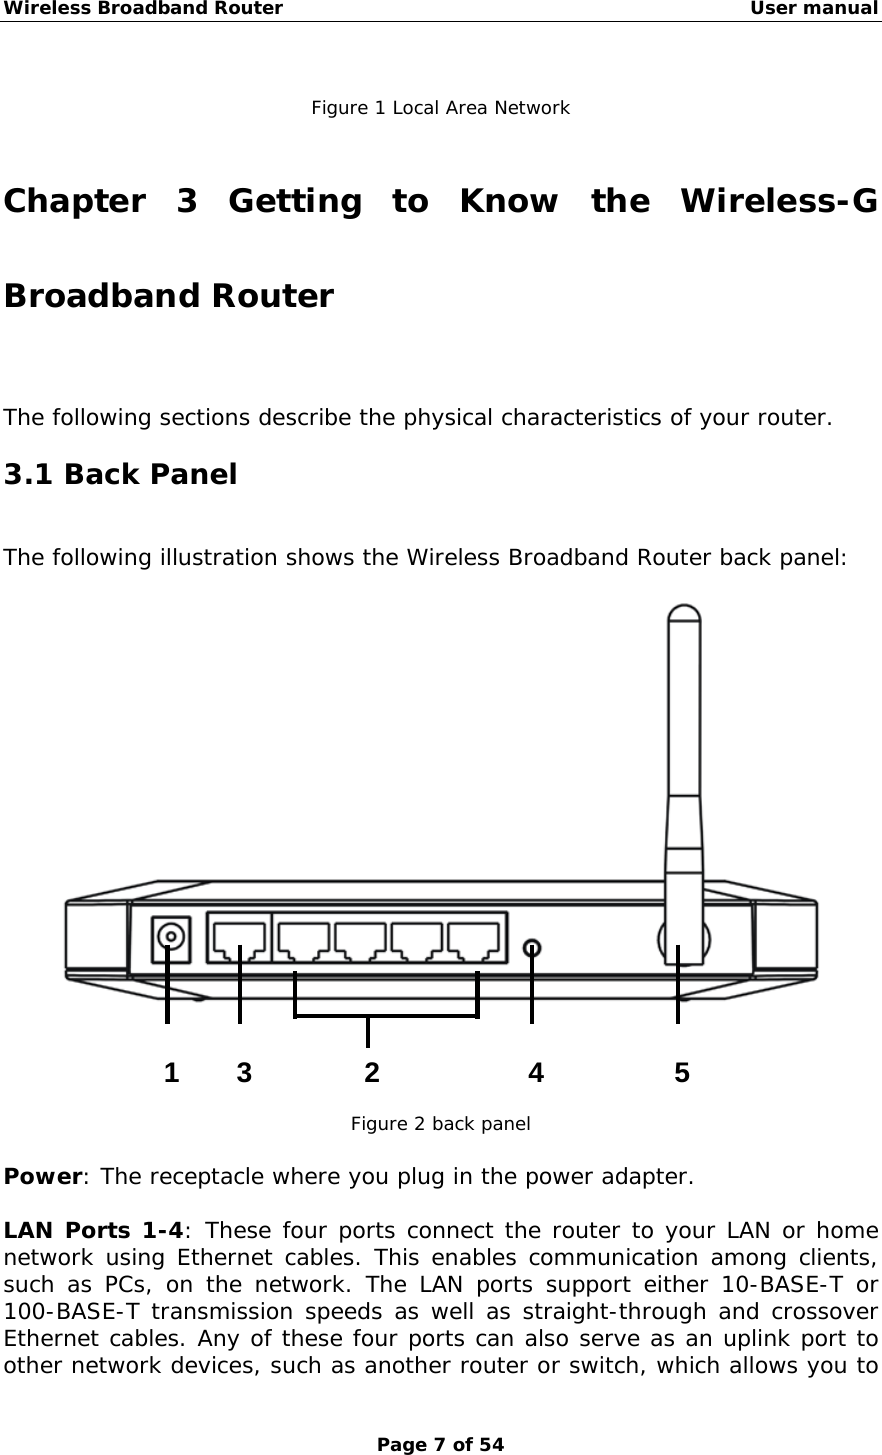 Wireless Broadband Router                                                   User manual Page 7 of 54  Figure 1 Local Area Network  Chapter 3 Getting to Know the Wireless-G Broadband Router The following sections describe the physical characteristics of your router. 3.1 Back Panel The following illustration shows the Wireless Broadband Router back panel:       Figure 2 back panel  Power: The receptacle where you plug in the power adapter.  LAN Ports 1-4: These four ports connect the router to your LAN or home network using Ethernet cables. This enables communication among clients, such as PCs, on the network. The LAN ports support either 10-BASE-T or 100-BASE-T transmission speeds as well as straight-through and crossover Ethernet cables. Any of these four ports can also serve as an uplink port to other network devices, such as another router or switch, which allows you to 1 23 4 5  